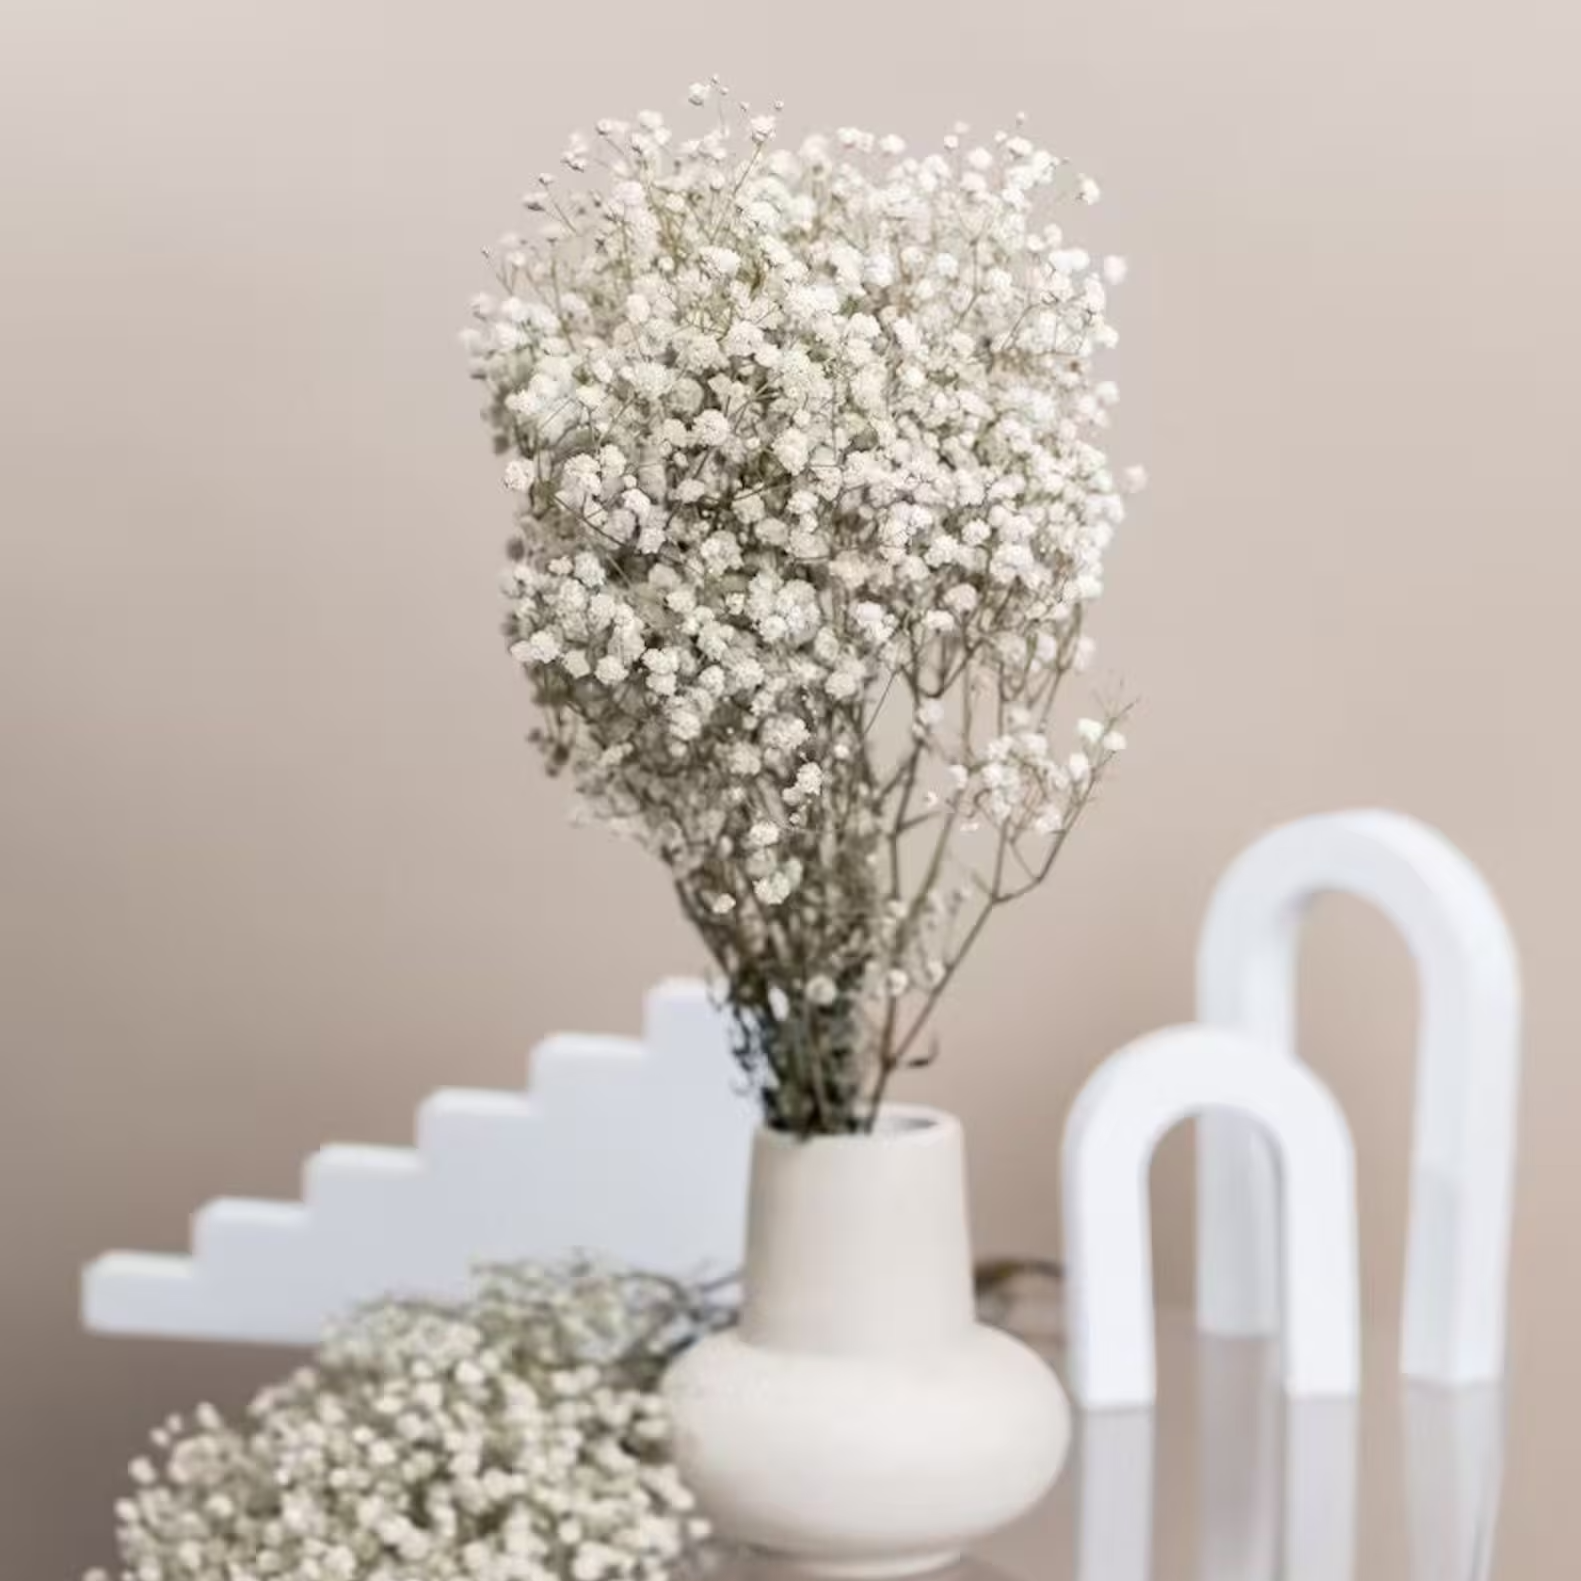 Natural Dried Baby's Breath